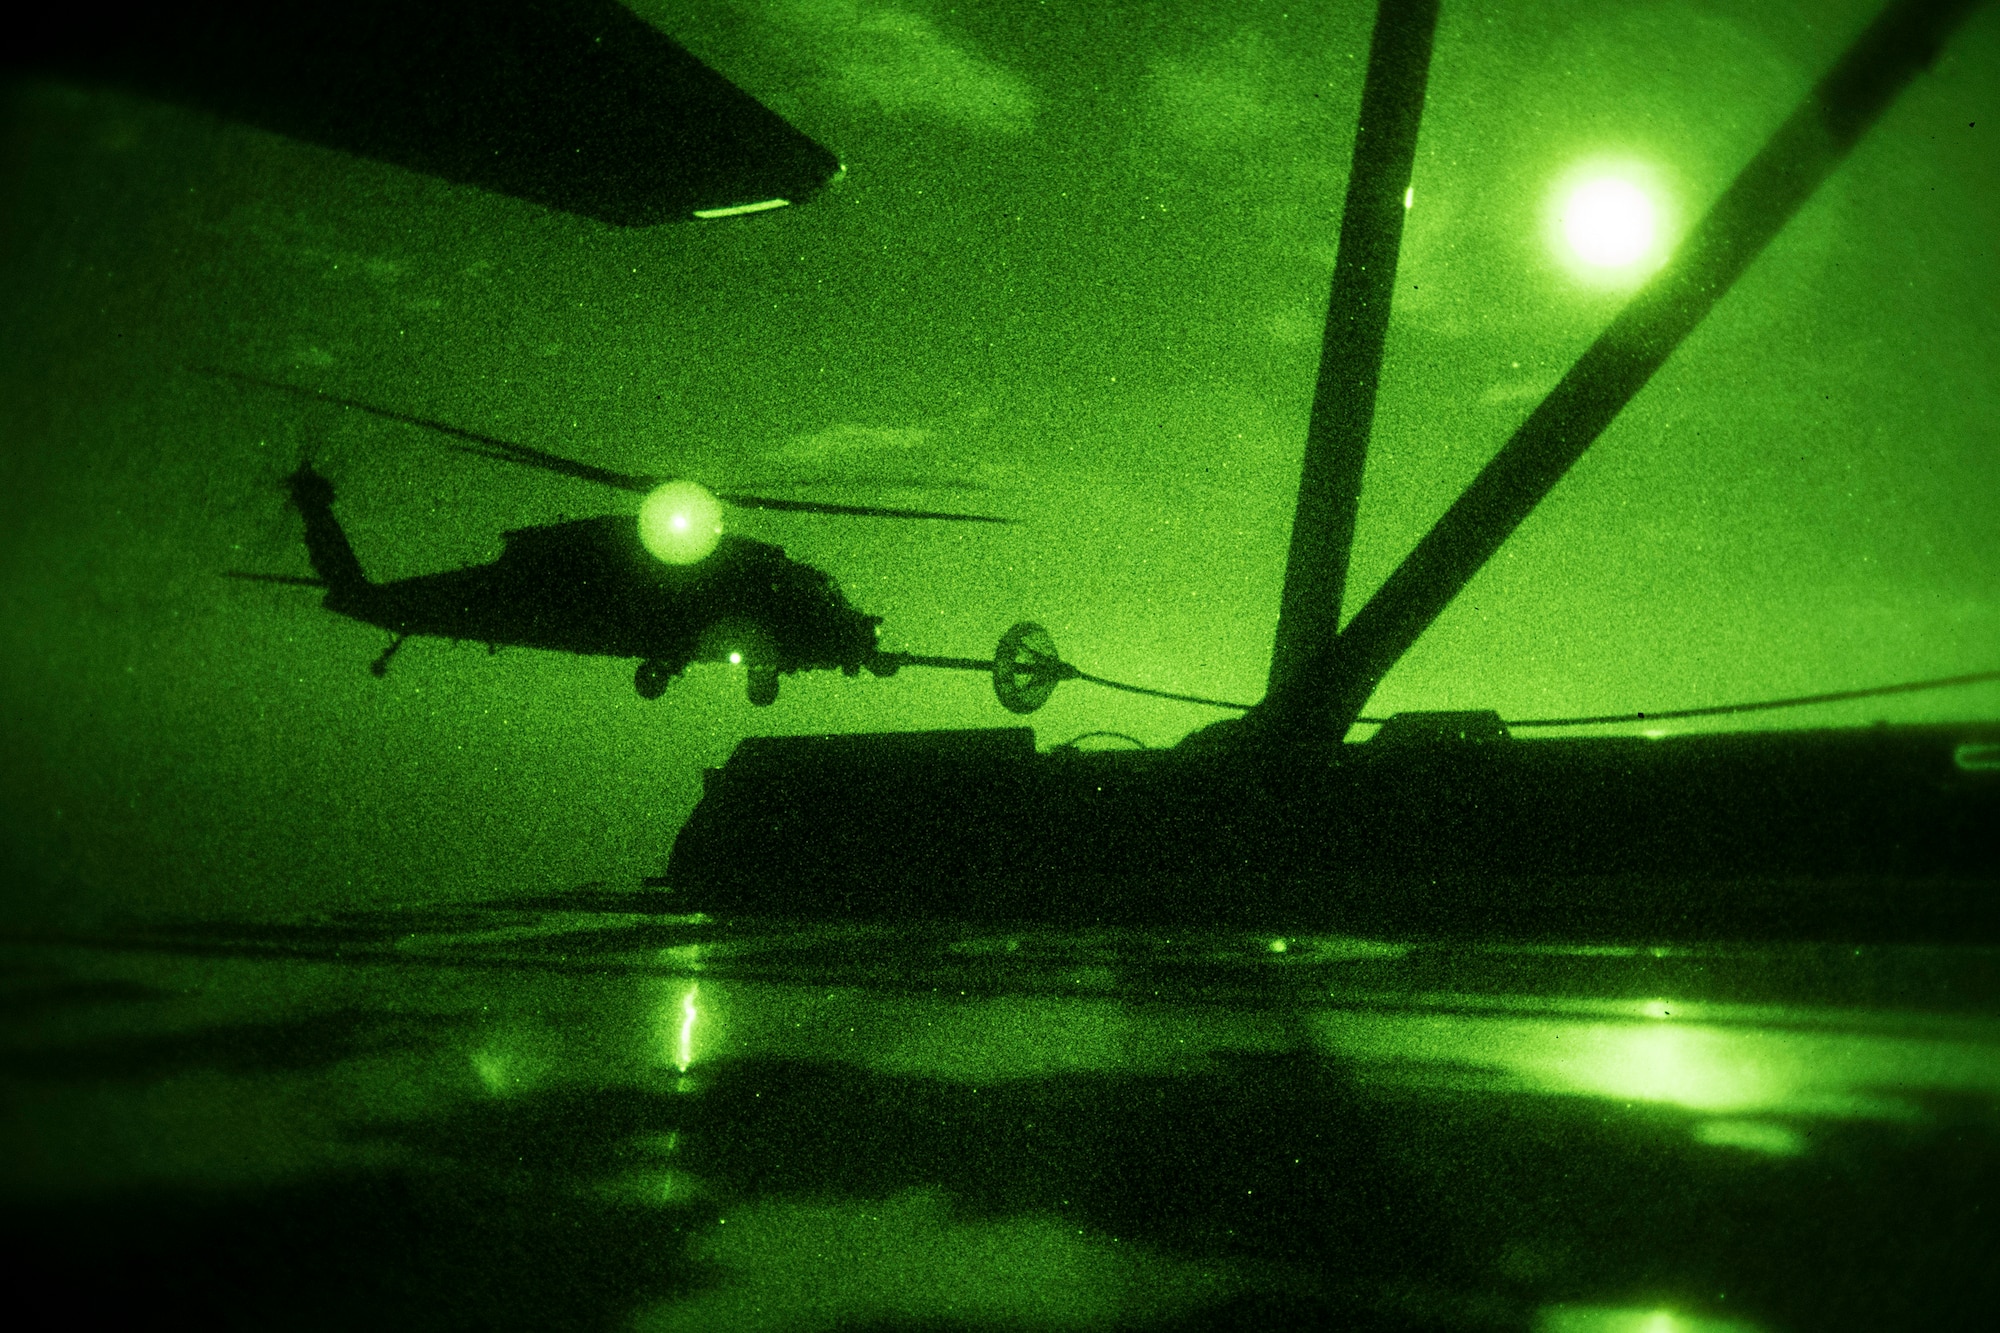 A night vision photo of a military rescue helicopter receiving fuel from a carrier aircraft.